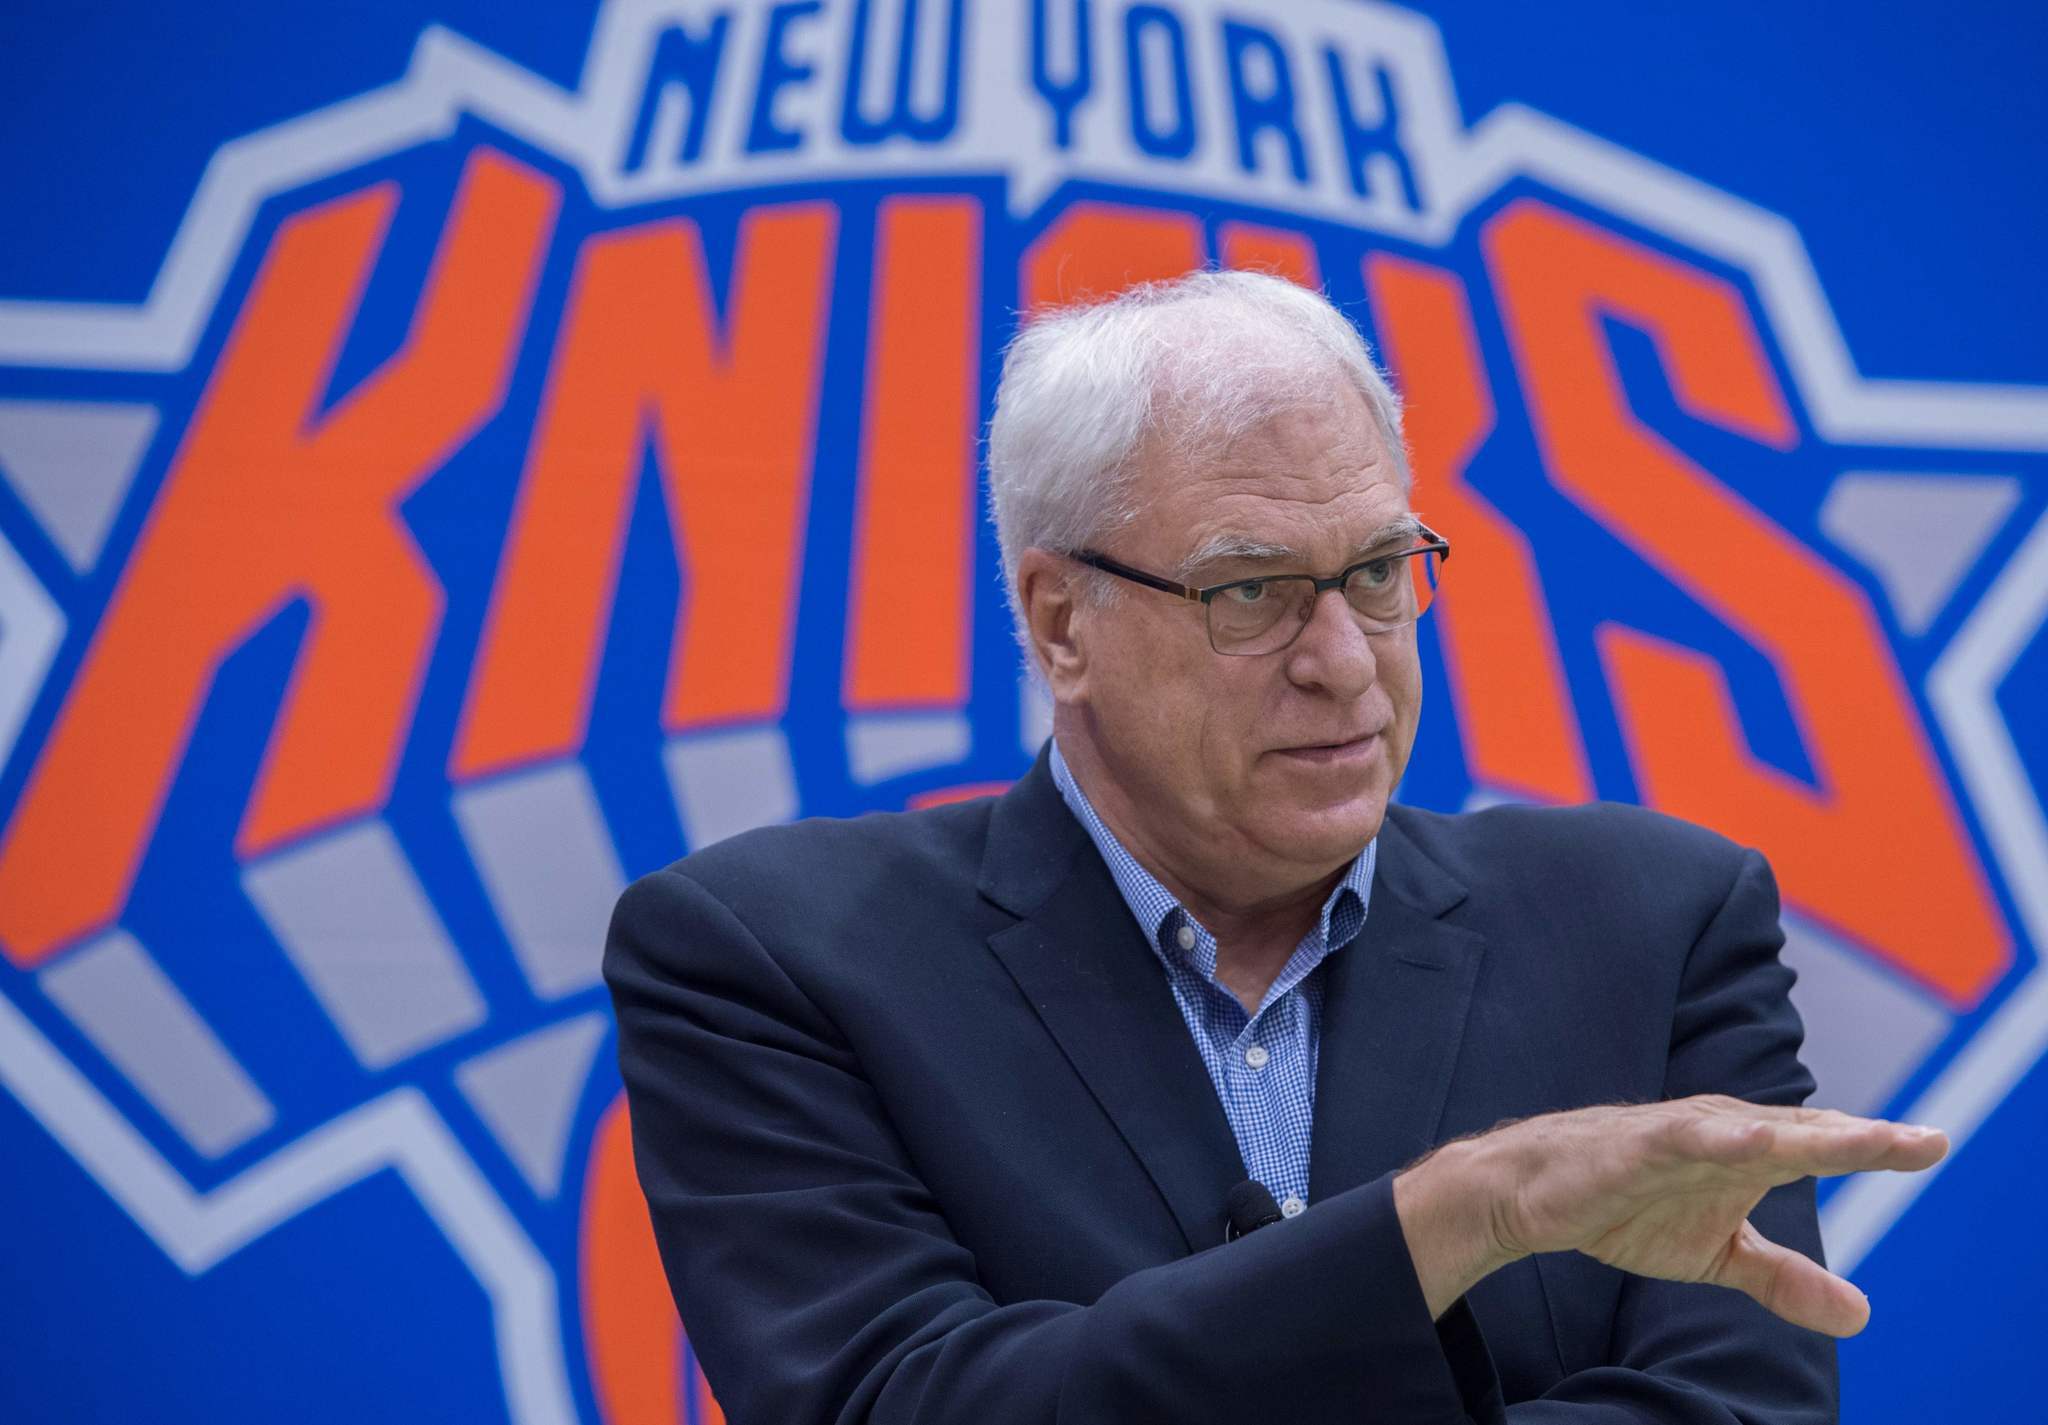 Derrick Rose may have gone AWOL, but Phil Jackson is MIA for Knicks